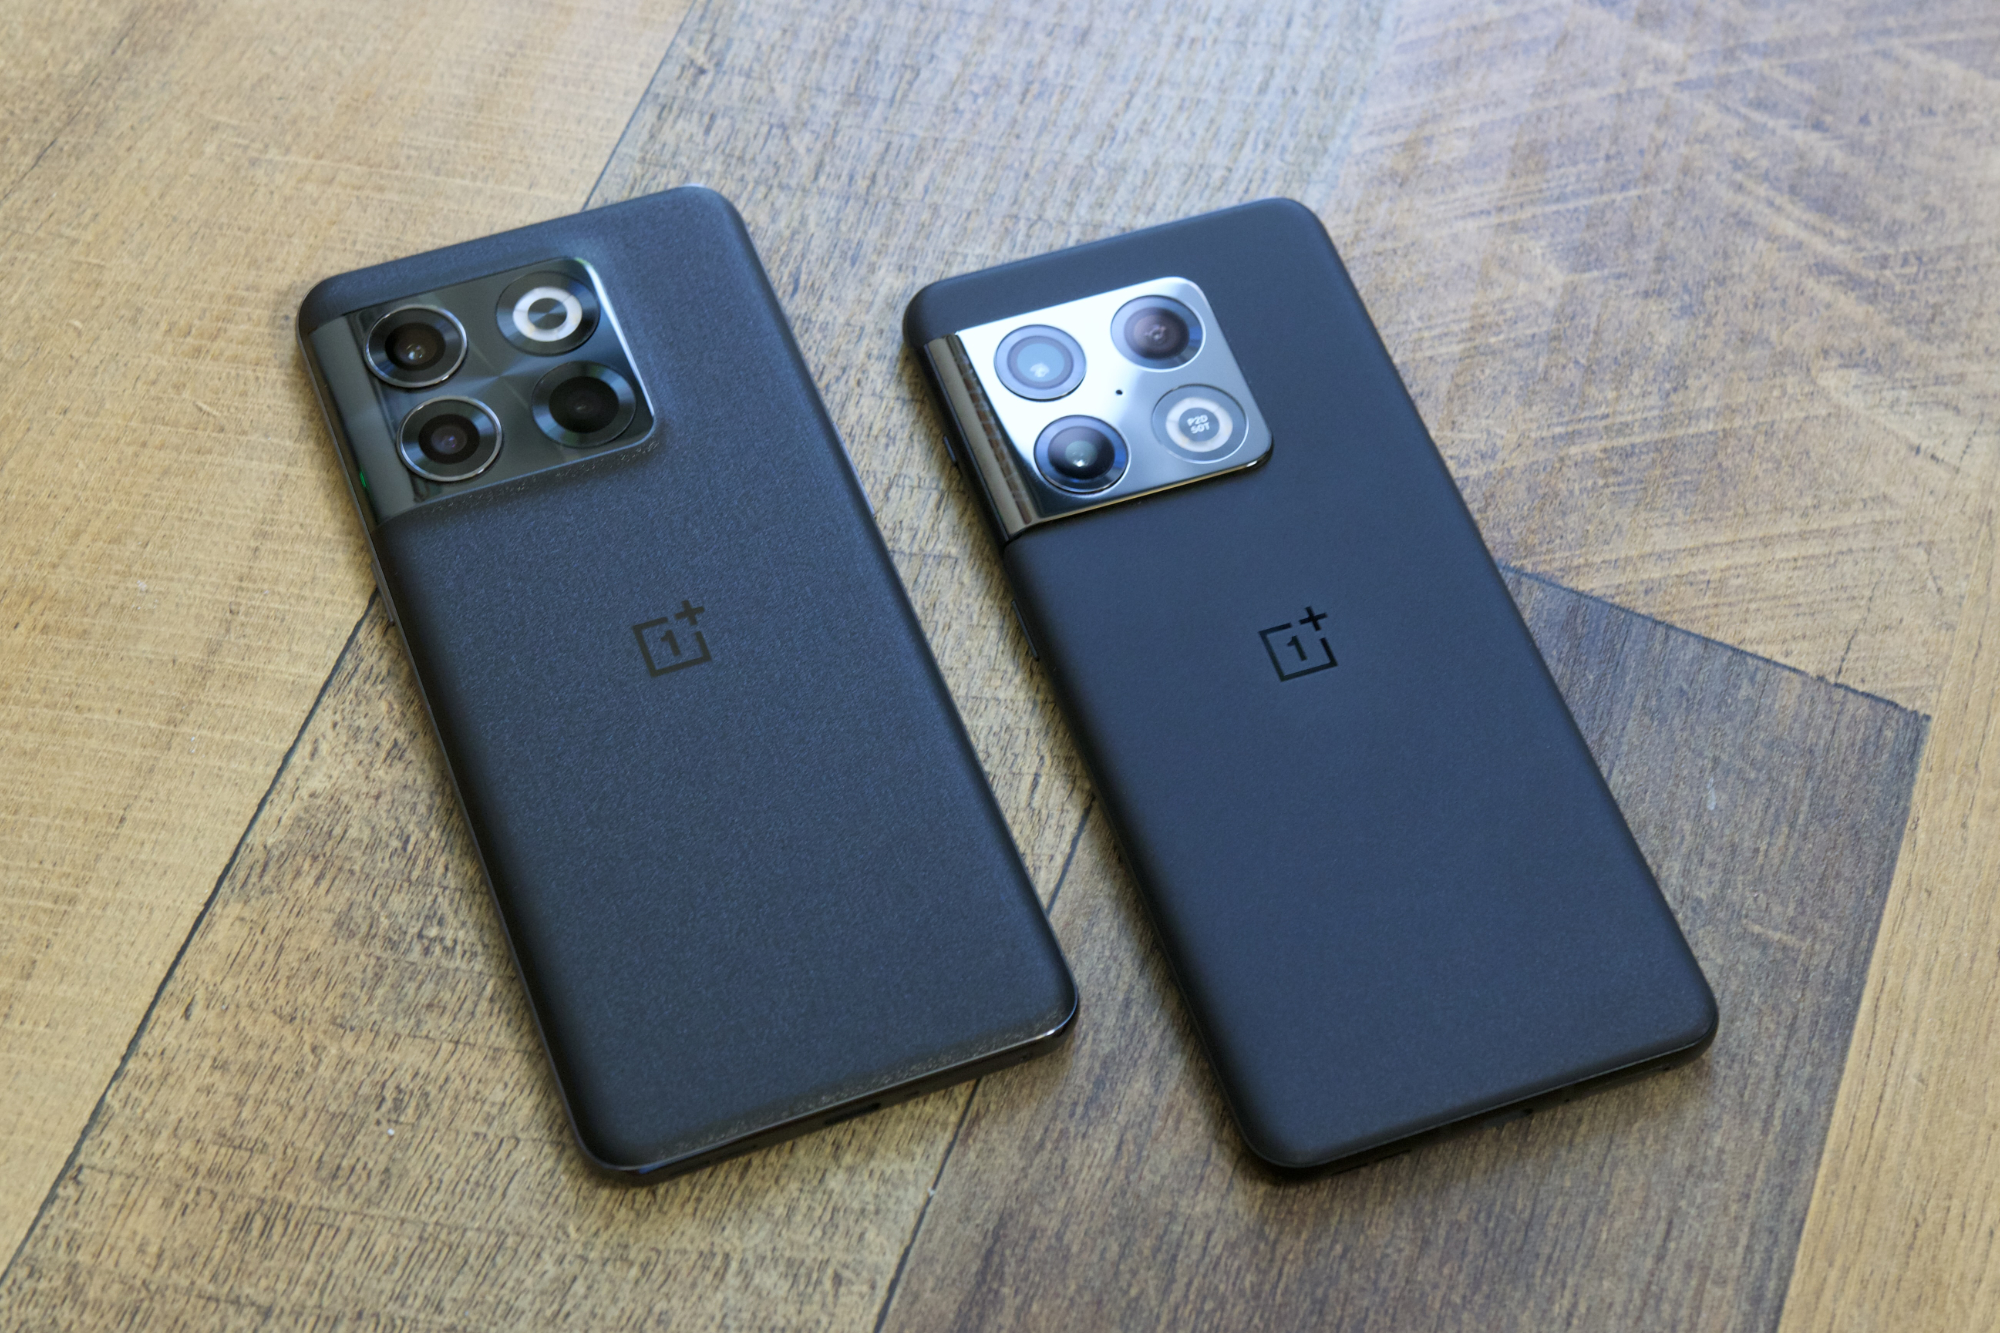 OnePlus 10 Pro: 3 reasons to get it (and 1 reason why most people